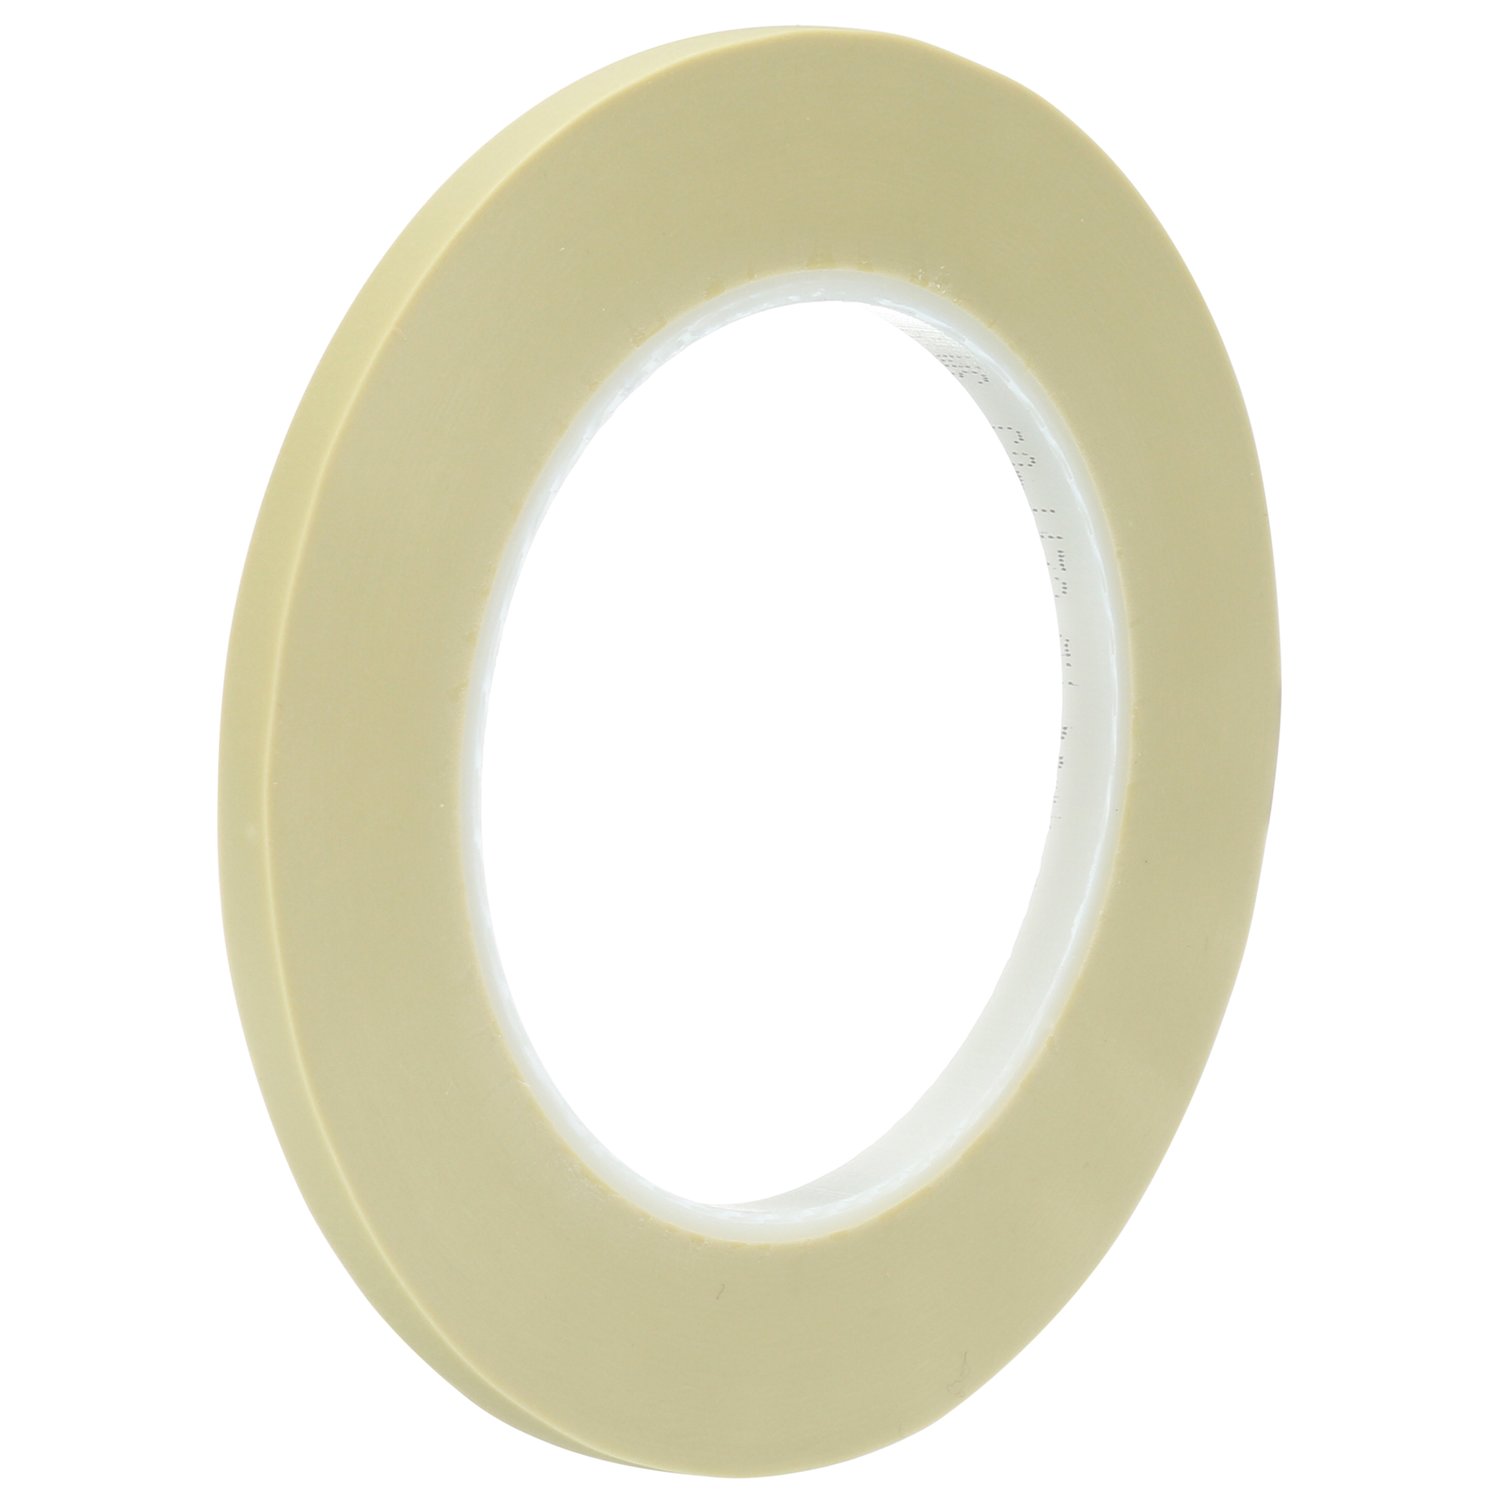  Scotch Removable Fabric Tape, 3/4 in x 180 in, 1/Pack,  Removable and Double Sided (FTR-1-CFT) : Office Products